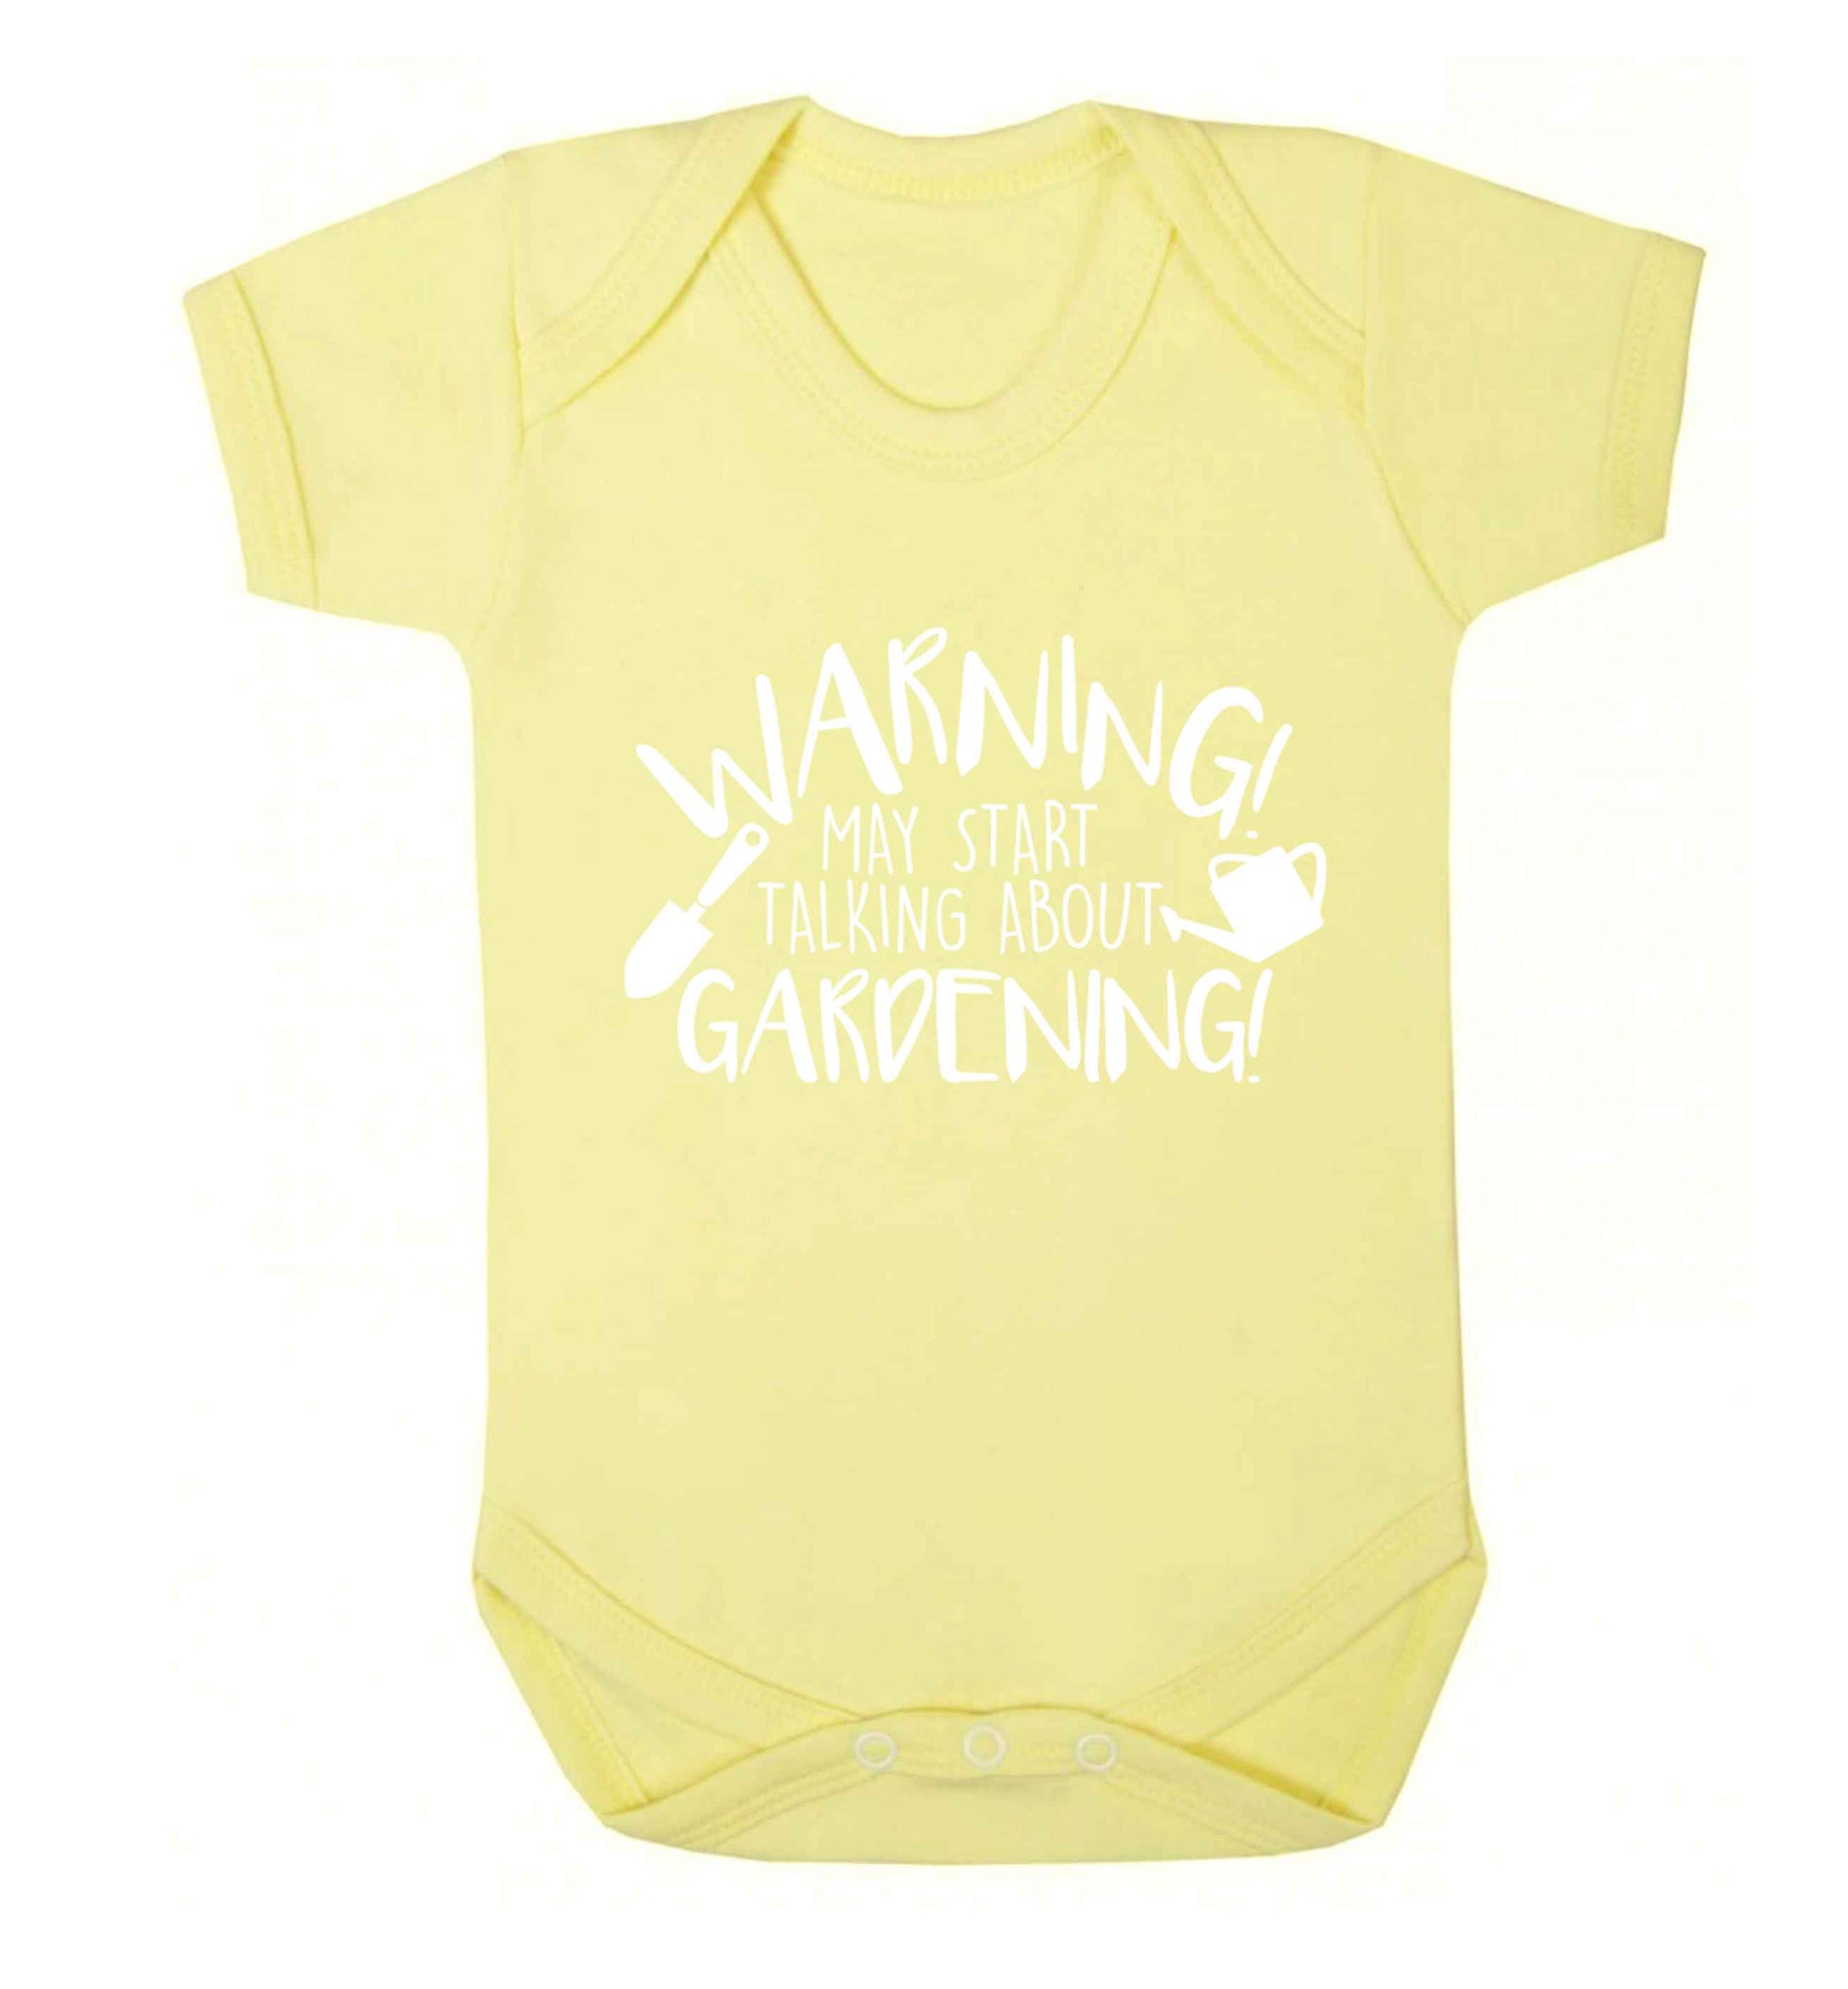 Warning may start talking about gardening Baby Vest pale yellow 18-24 months